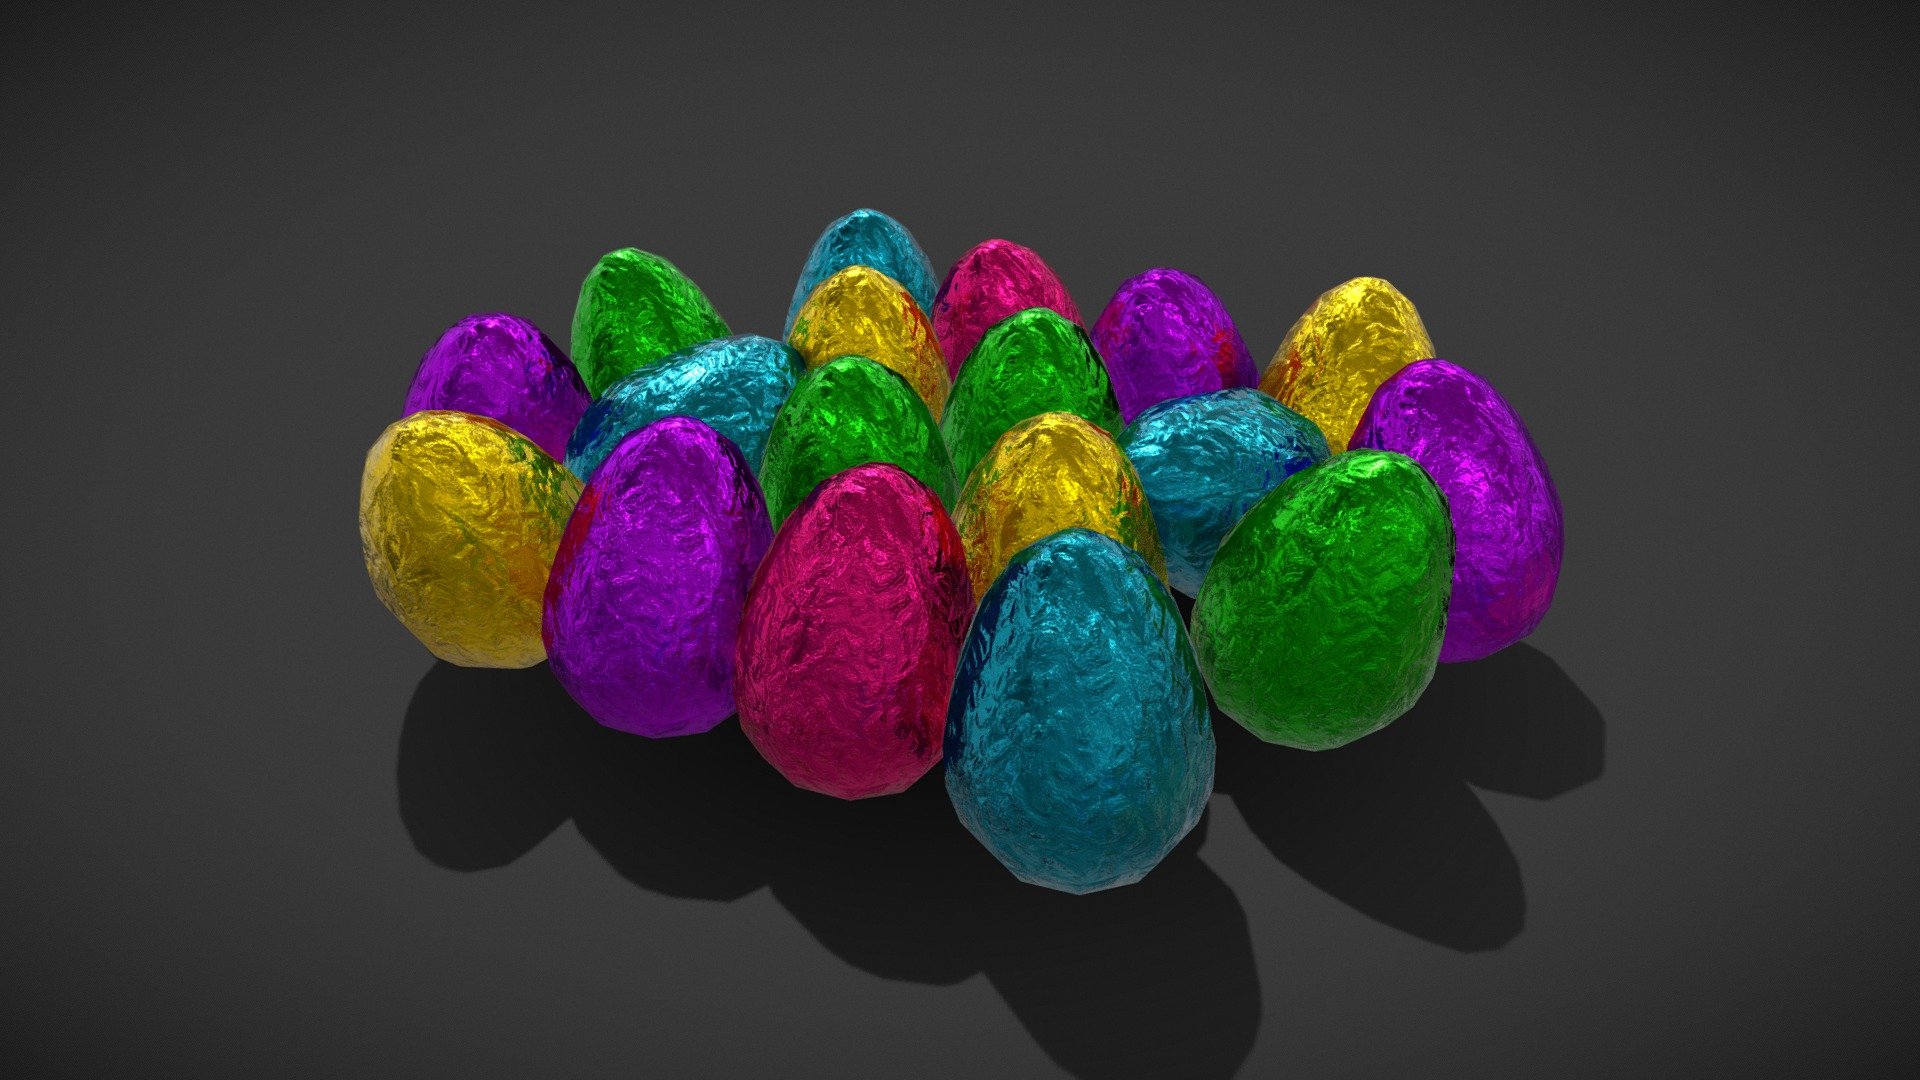 Chocolate_Tin_Foil_Eggs_OBJ
VR / AR / Low-poly
PBR approved
Geometry Polygon mesh
Polygons 1,900
Vertices 1,833
Textures PNG 4K - Chocolate_Tin_Foil_Eggs - Buy Royalty Free 3D model by GetDeadEntertainment 3d model